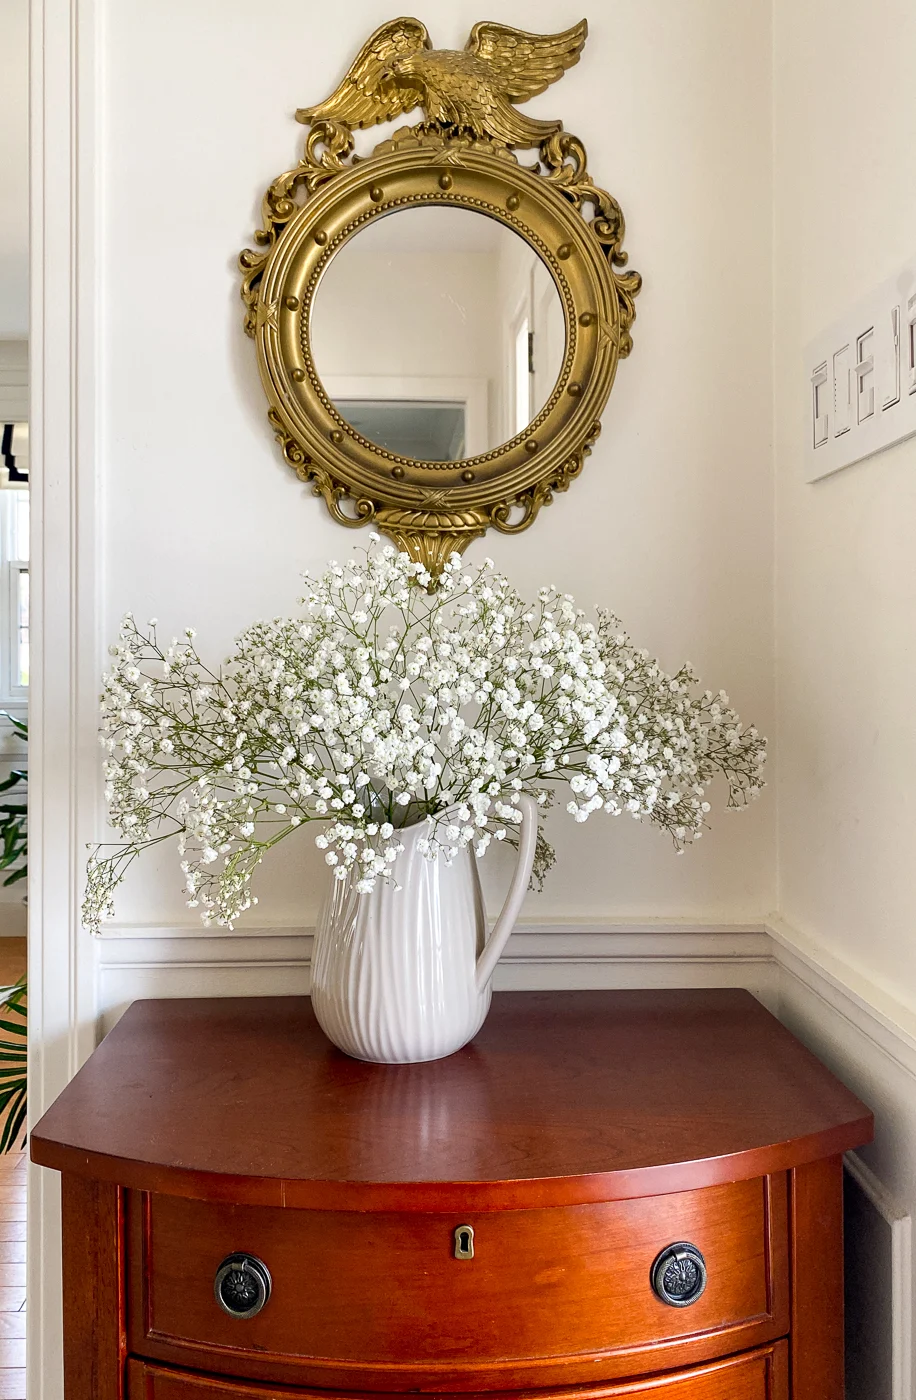 entryway cabinet with federal mirror and flowers in vase